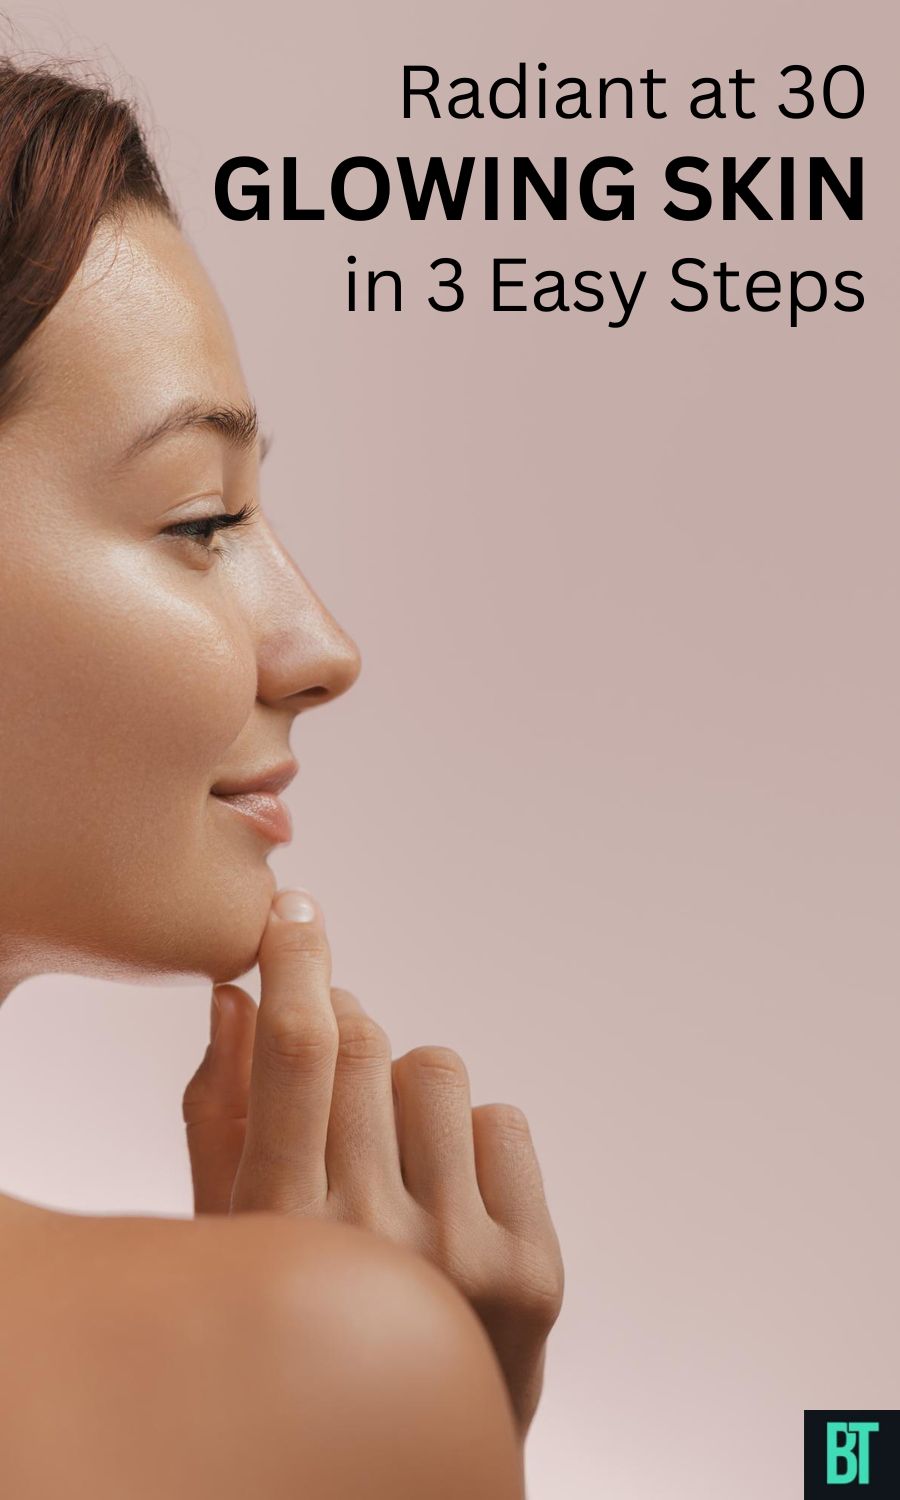 Radiant at 30: 3 Easy Steps to Achieve Glowing Skin Now